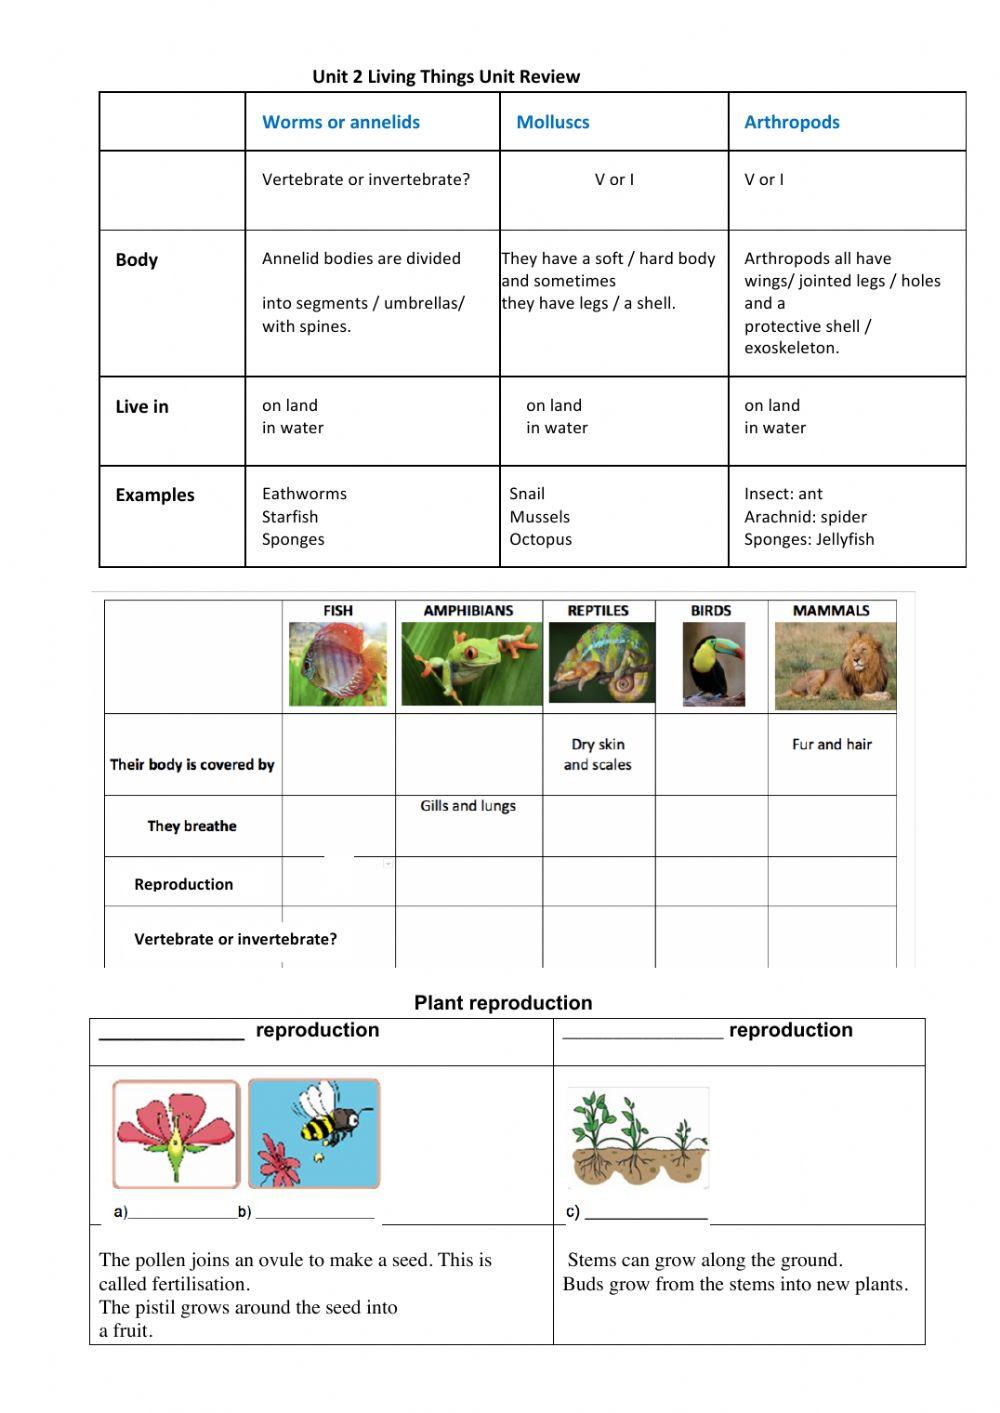 Living Things-Vertebrate and Invertebrate Animals. Plant reproduction